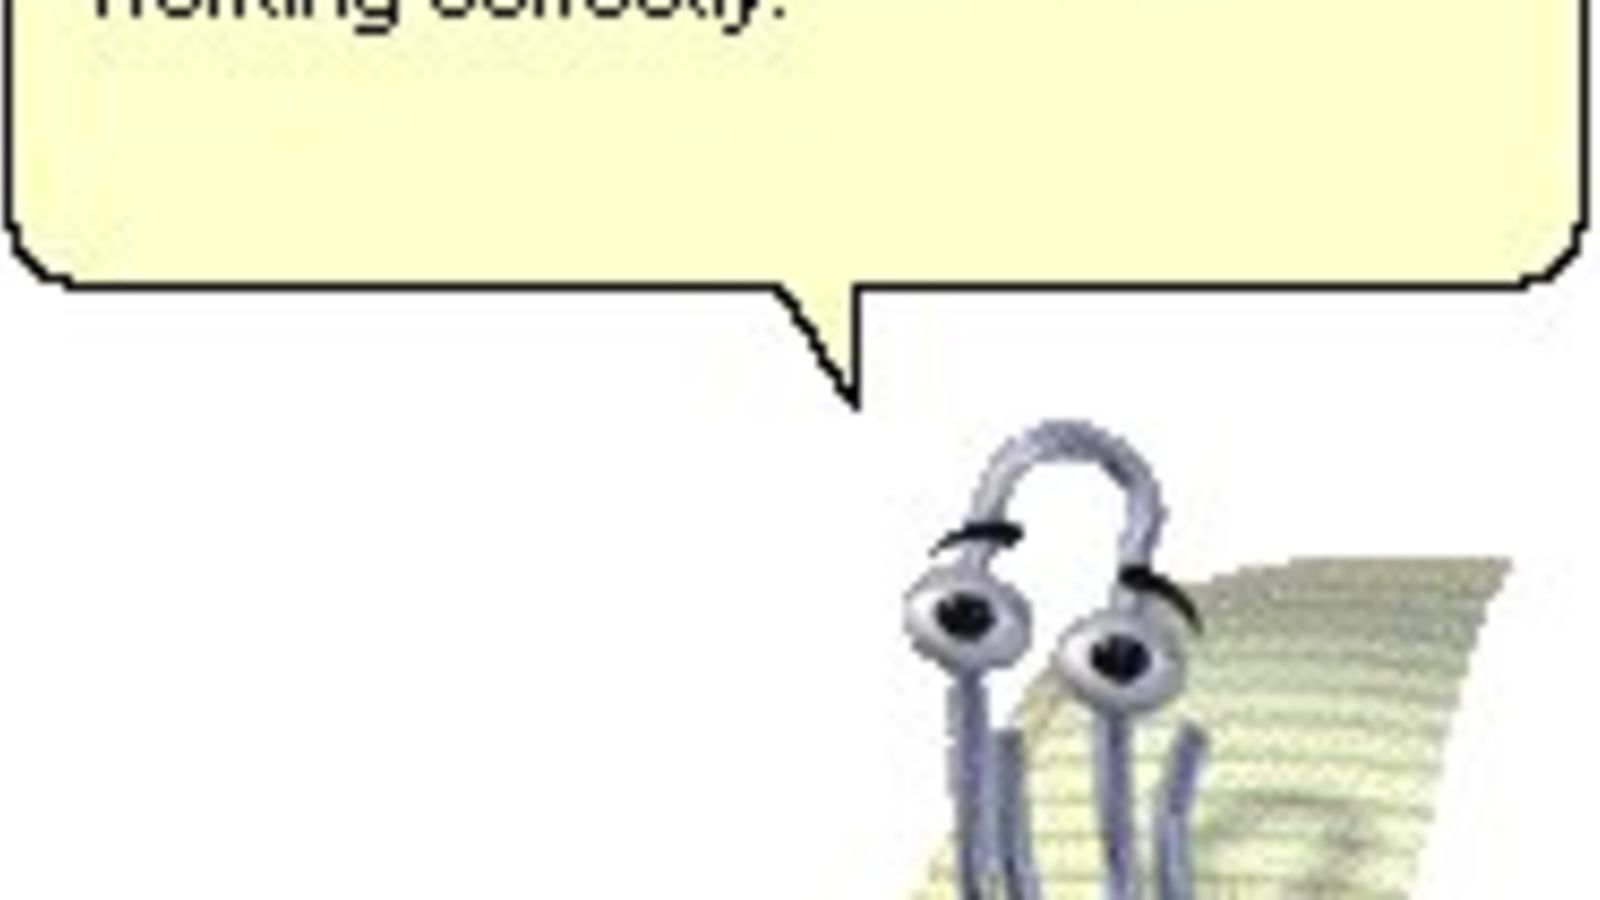 Clippy R I P The World Wasn T Ready For You Gizmodo Dungulie